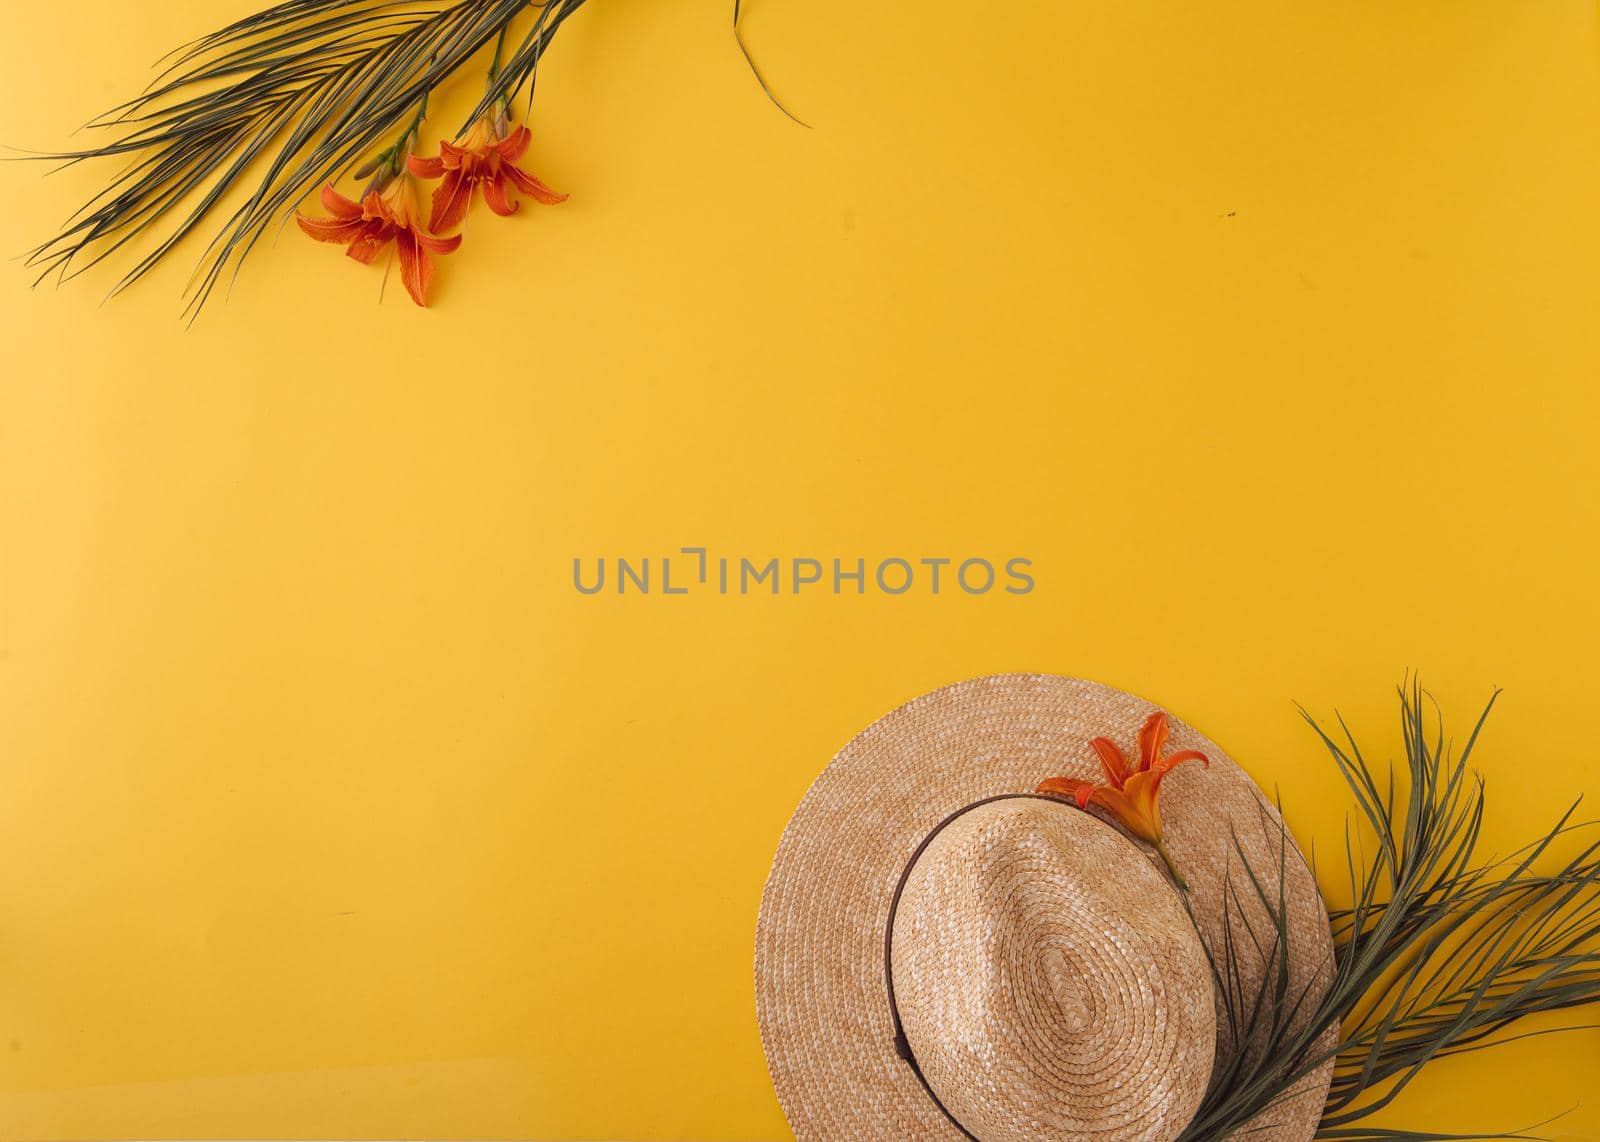 ummer background with straw hat and bag and palm leaves by maramorosz